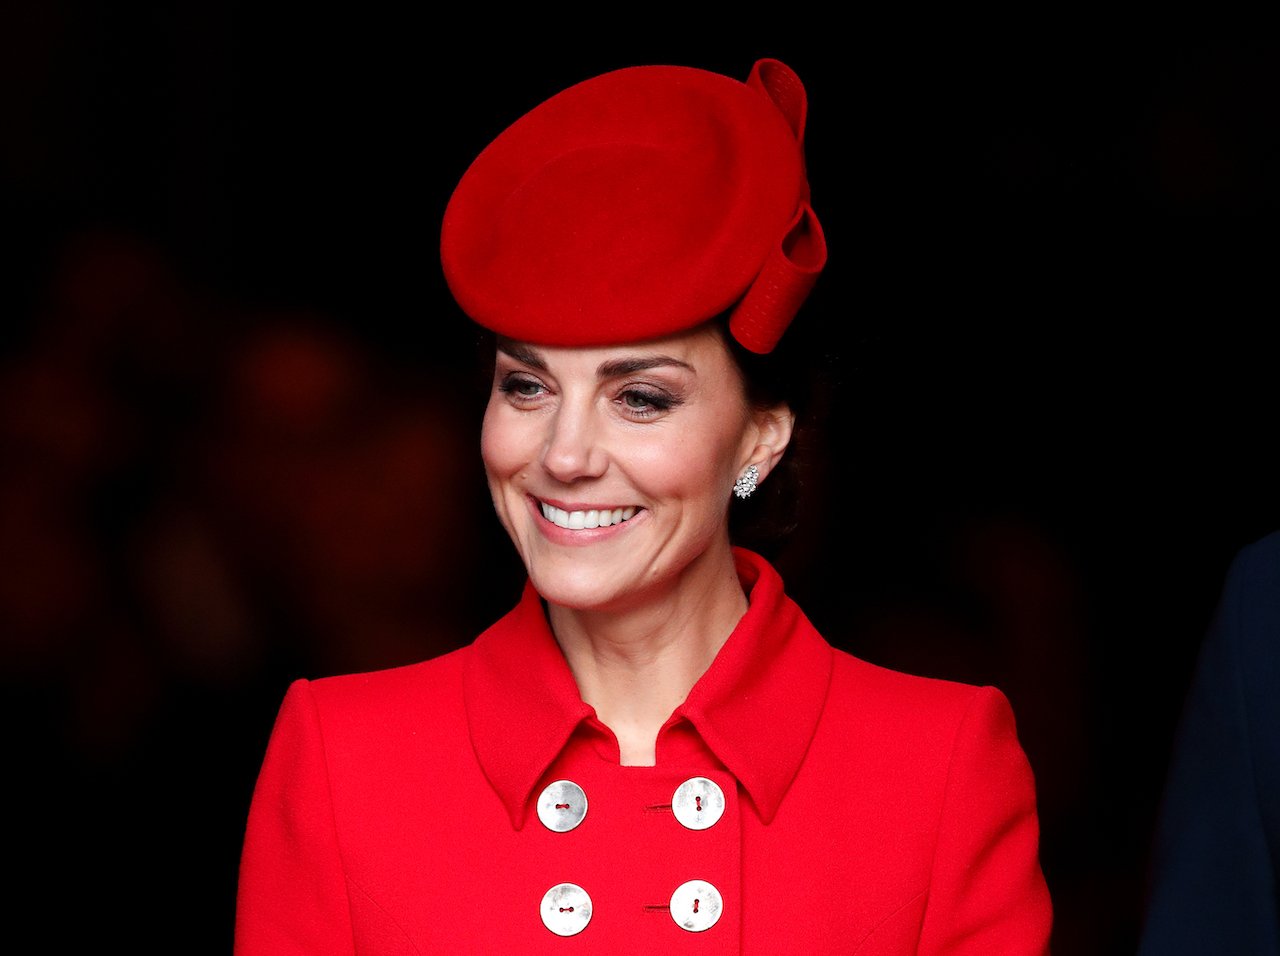 Kate Middleton attends the 2019 Commonwealth Day service at Westminster Abbey on March 11, 2019, in London, England, in her superhero color.